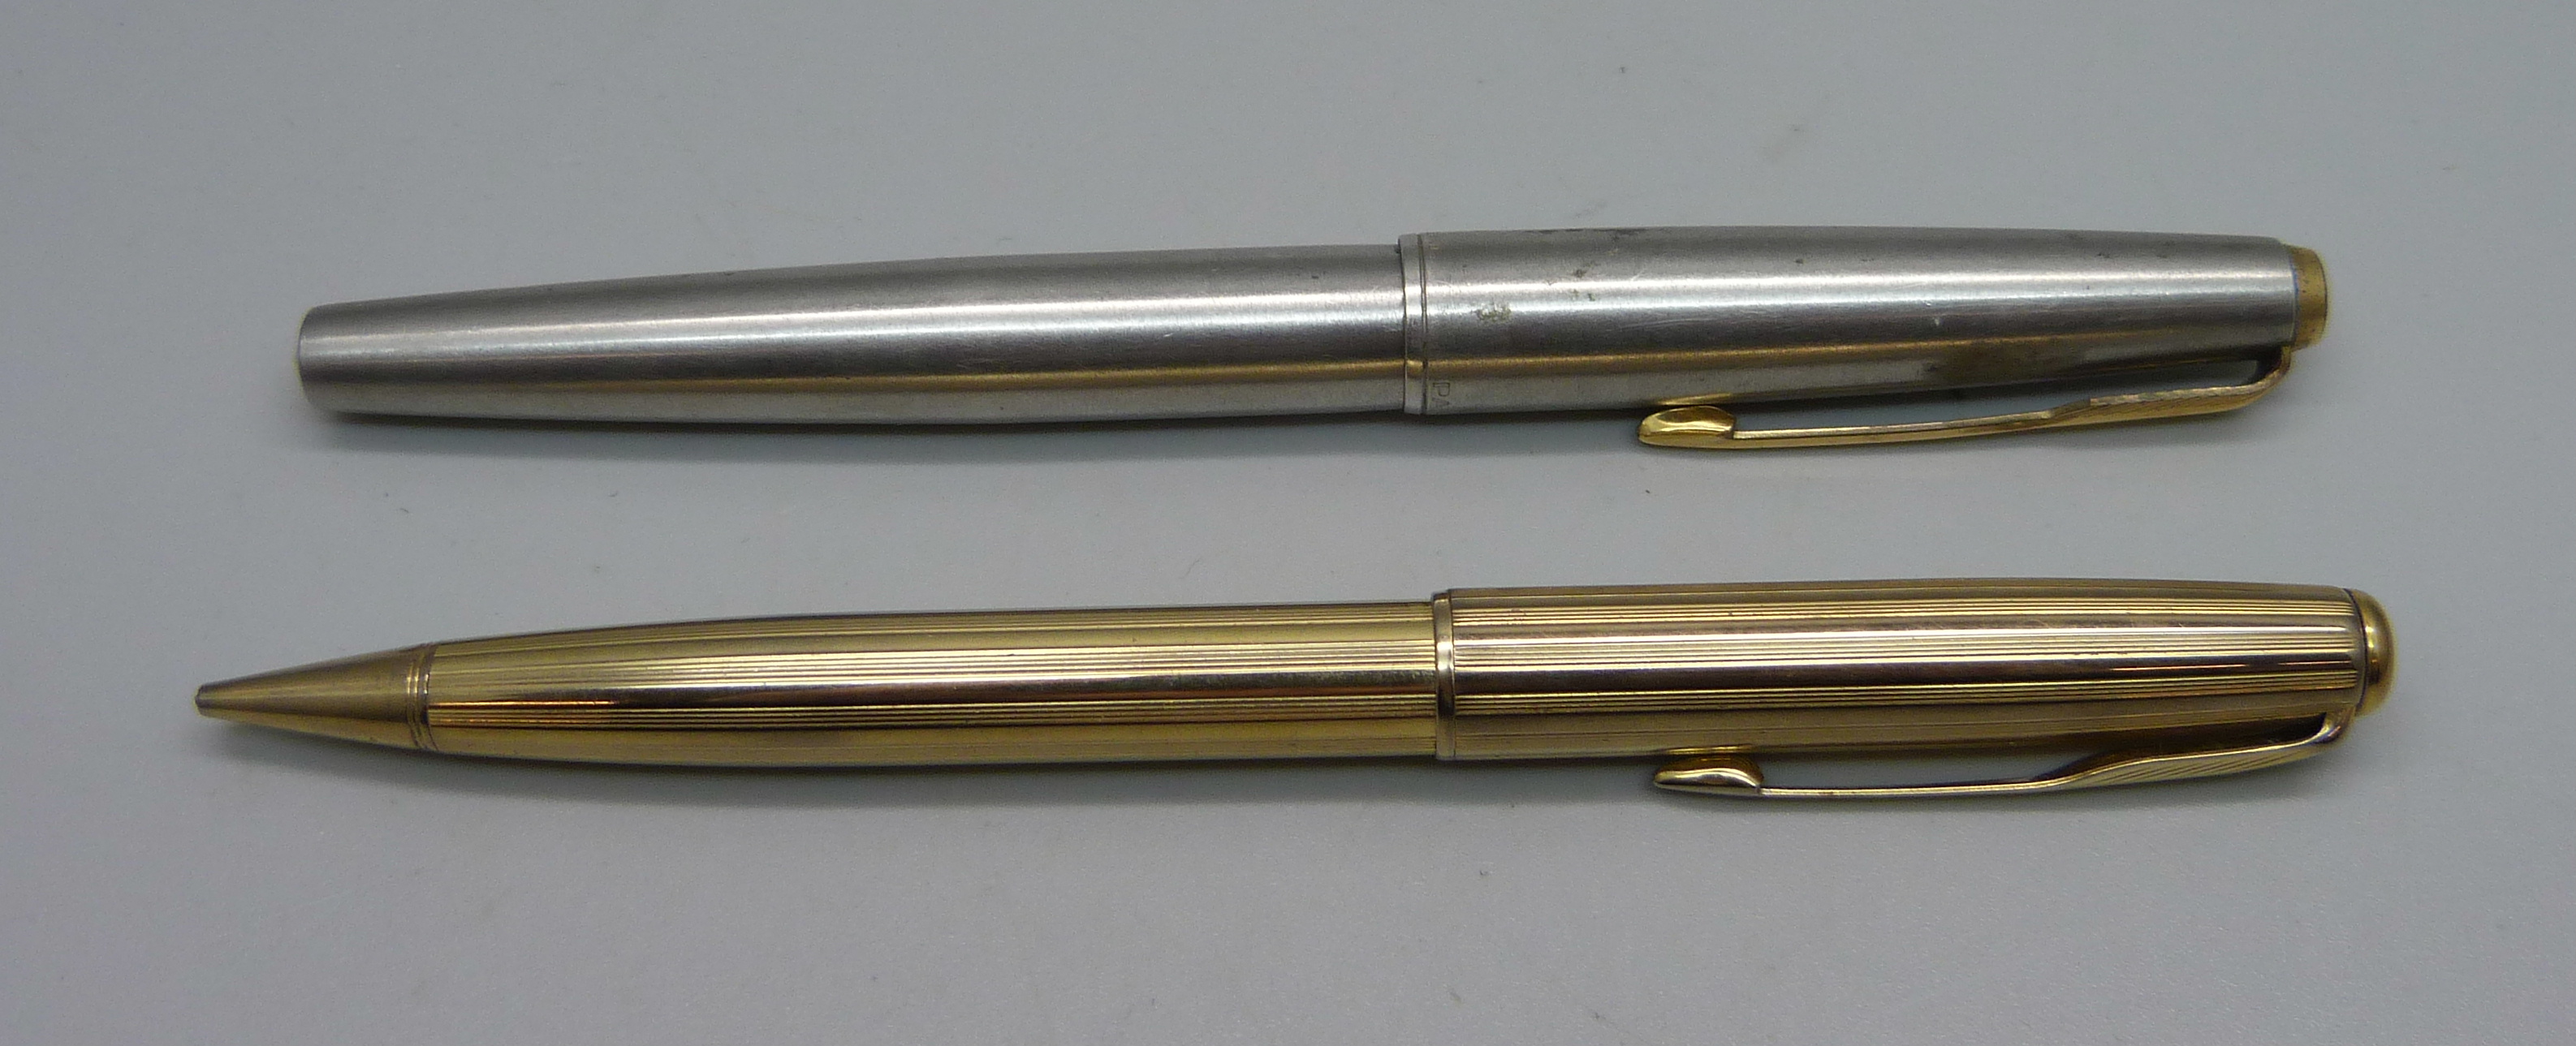 A Parker pen, barrel engraved, a/f and a Parker Sonnet pencil in gold plated casing